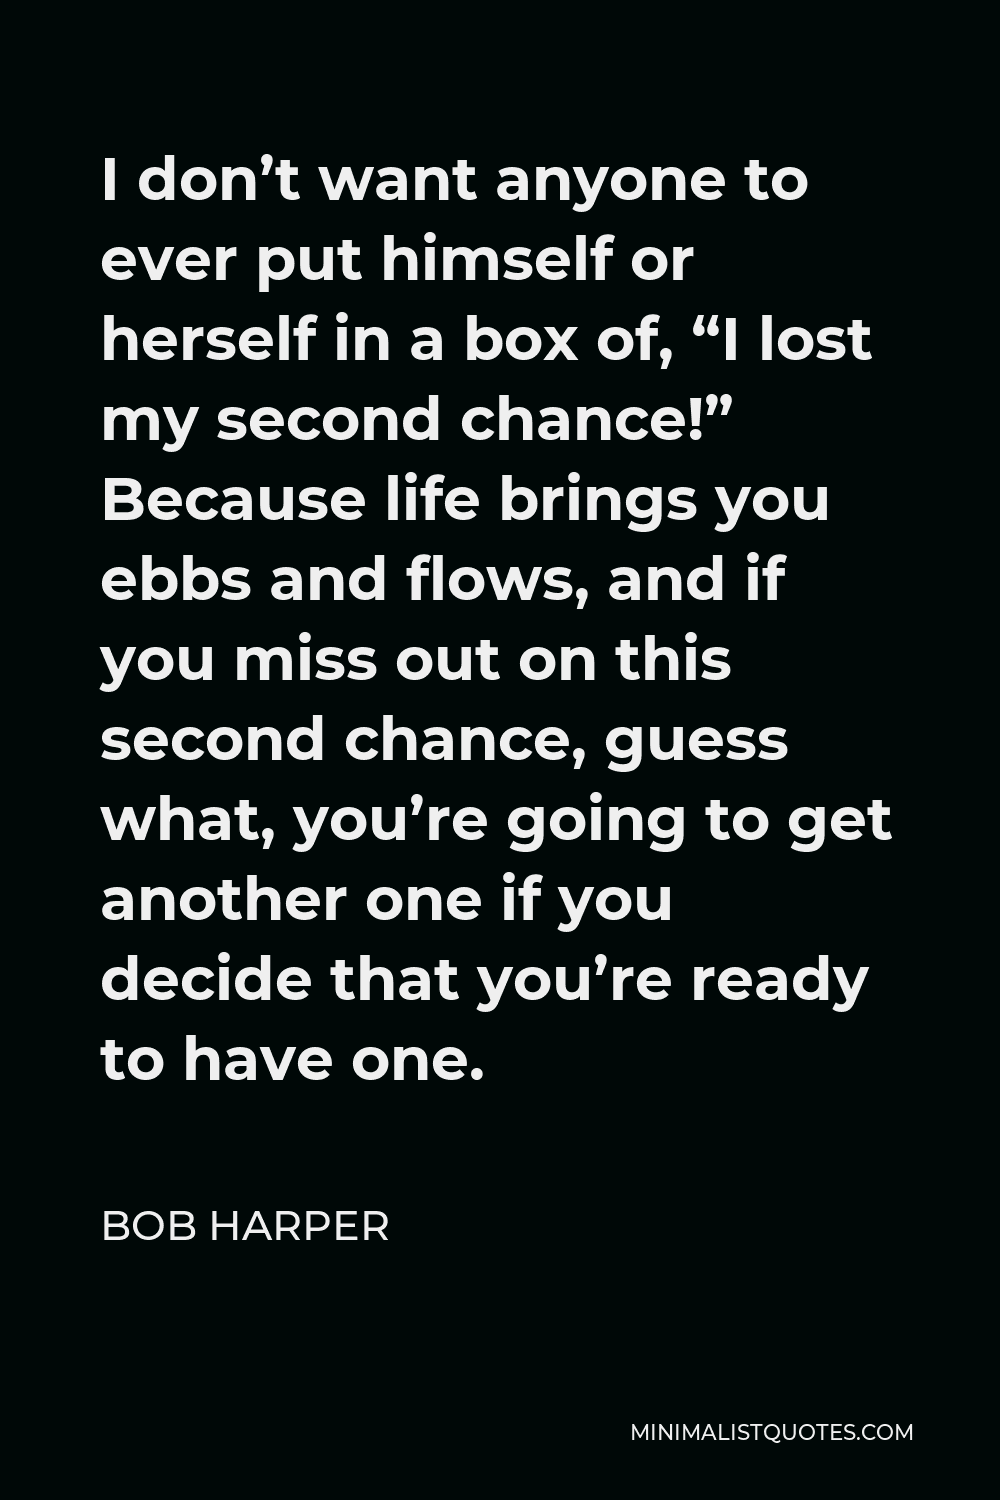 Bob Harper Quote - I don’t want anyone to ever put himself or herself in a box of, “I lost my second chance!” Because life brings you ebbs and flows, and if you miss out on this second chance, guess what, you’re going to get another one if you decide that you’re ready to have one.